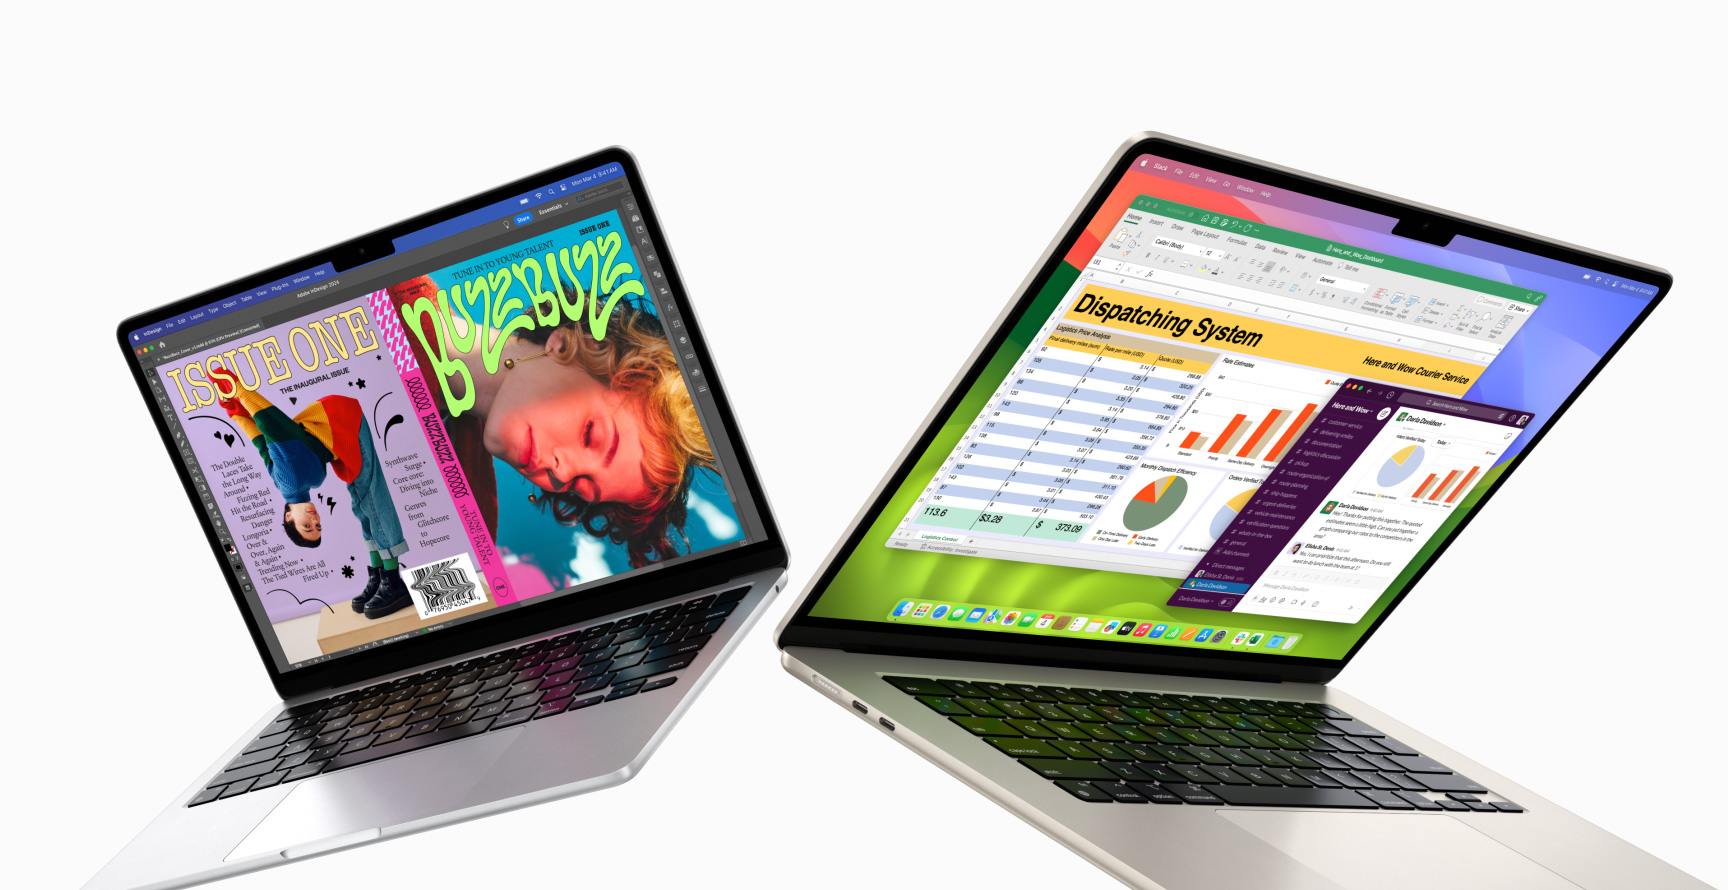 Partially open 13-inch MacBook Air on the left and 15-inch MacBook Air on the right. 13-inch screen shows colourful zine cover created with In Design. 15-inch screen shows Microsoft Excel and Slack.